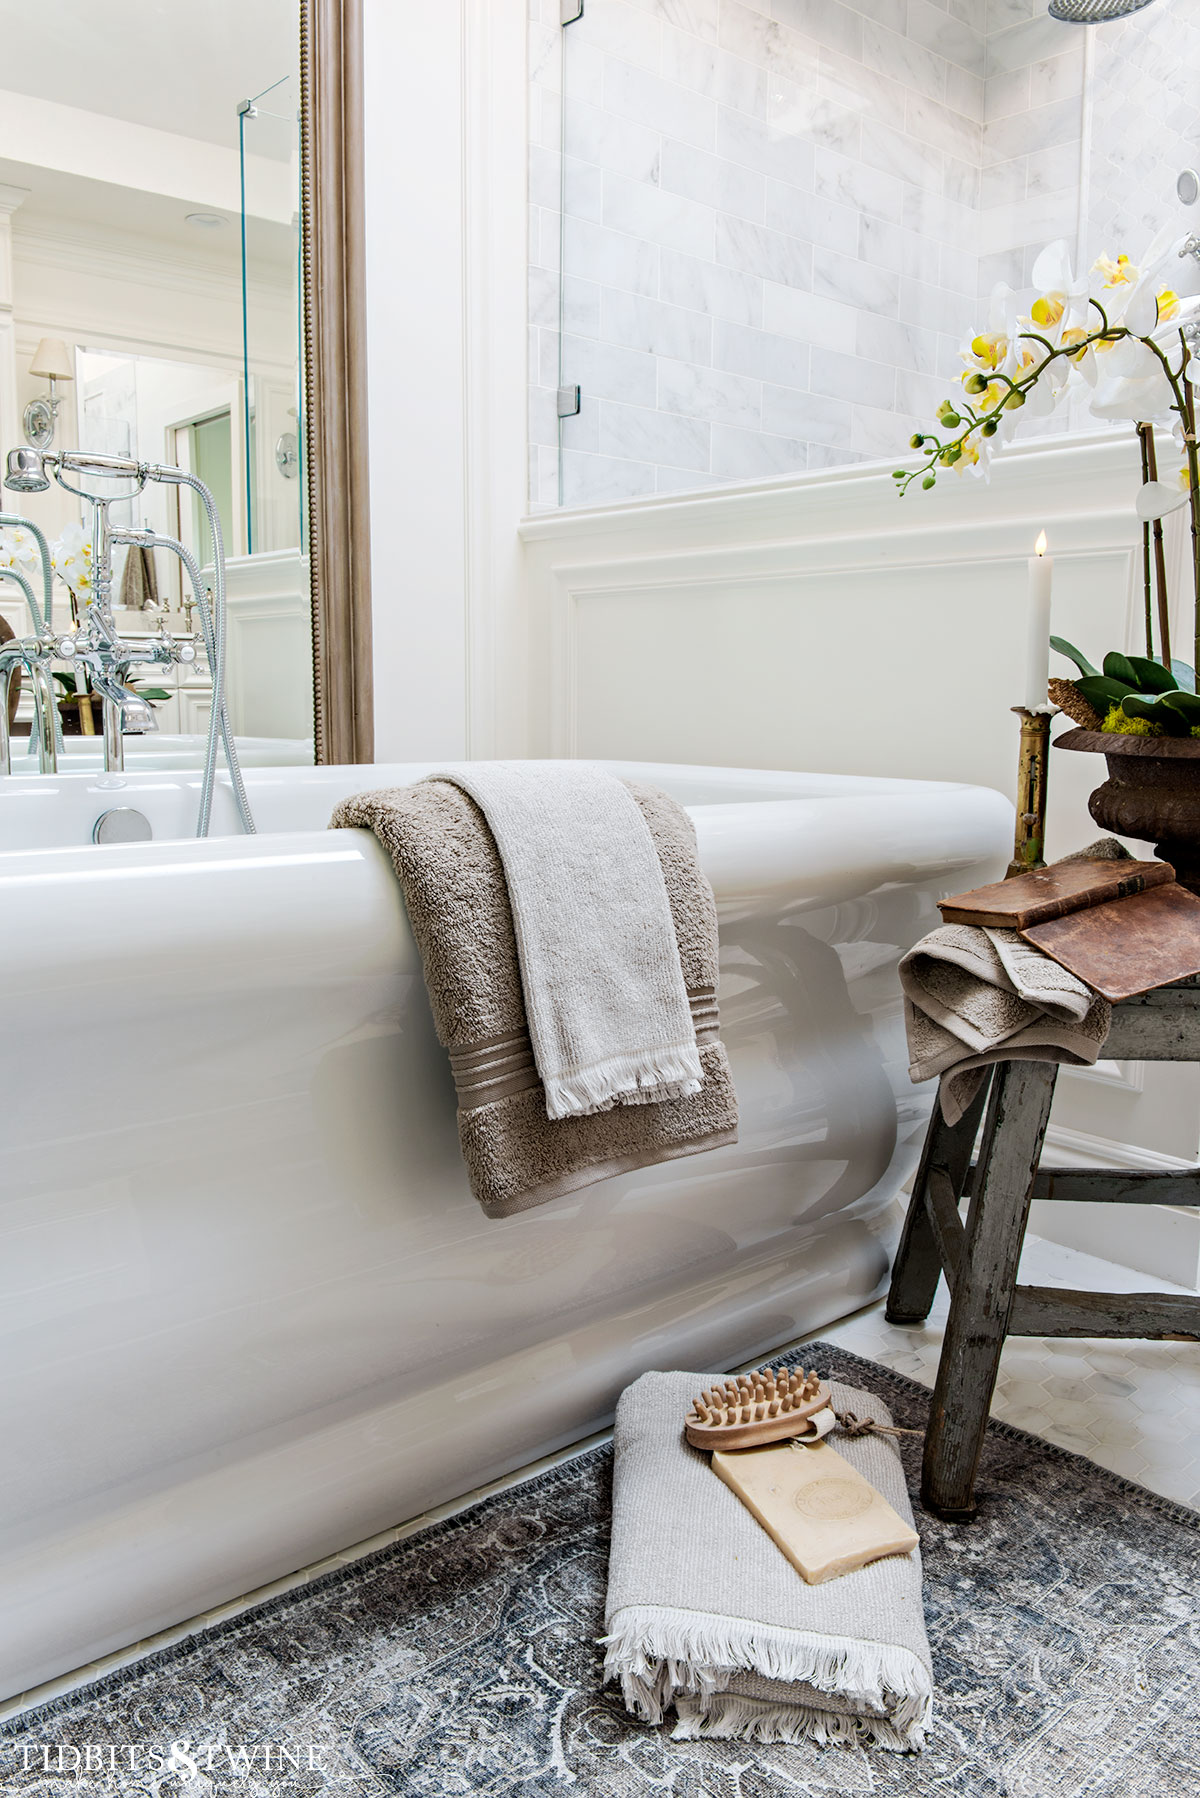 freestanding bathtub with towel draped over side and chippy stool with book